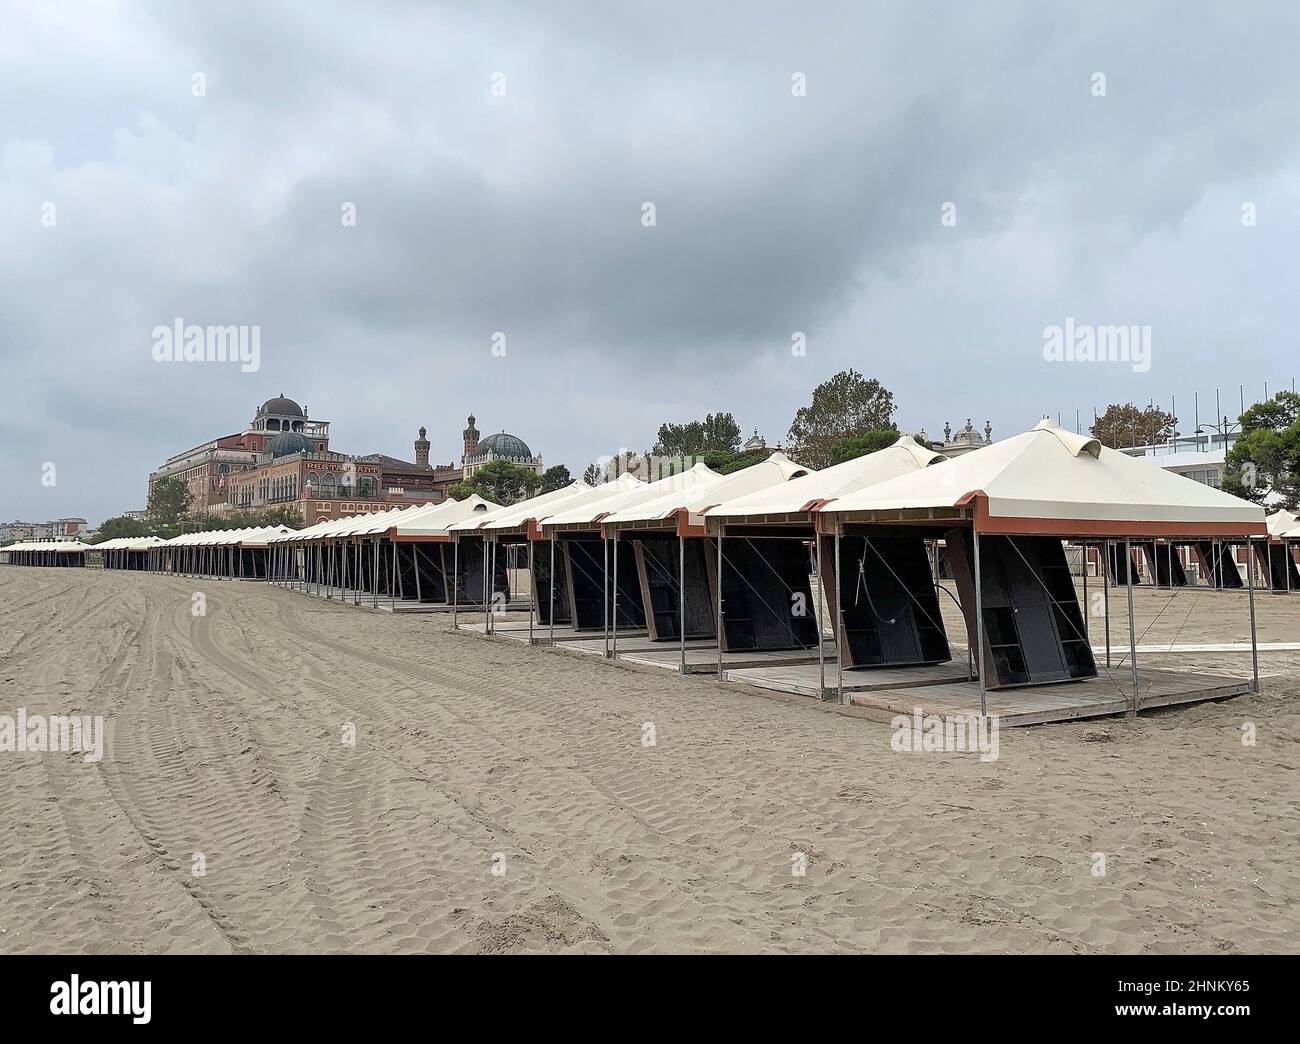 Huts at the Lido or Venice Lido, an island in the Venetian Lagoon, Italy Stock Photo